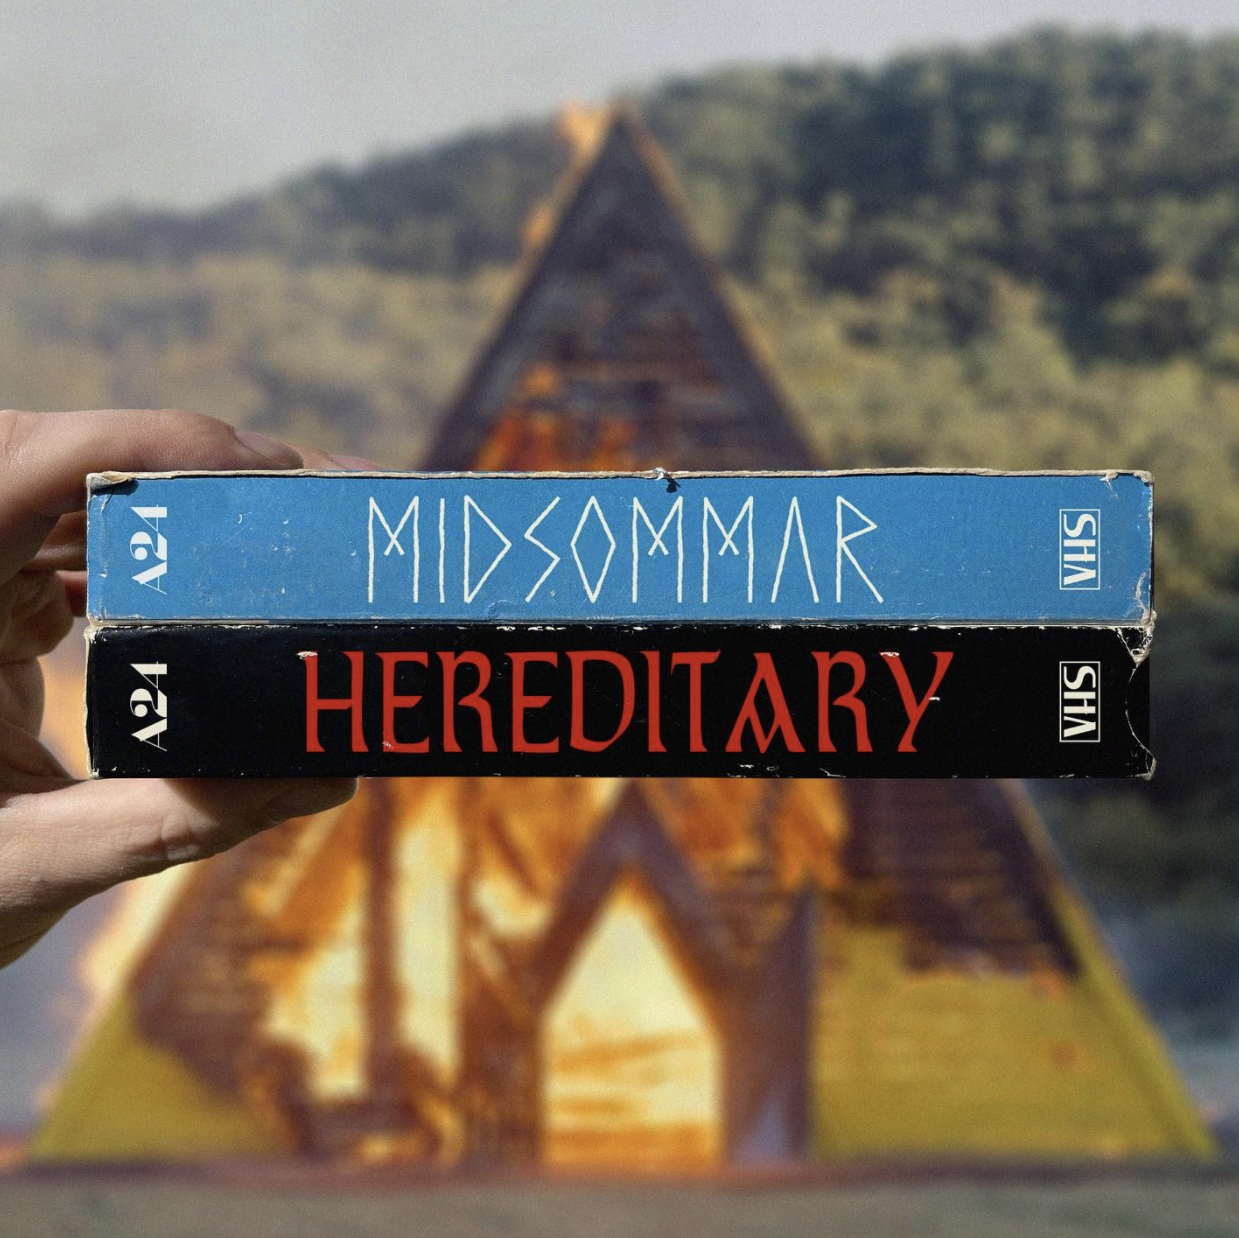 VHS tape edits - midsommar cinematography - A21 Sha Midsommar Hereditary A21